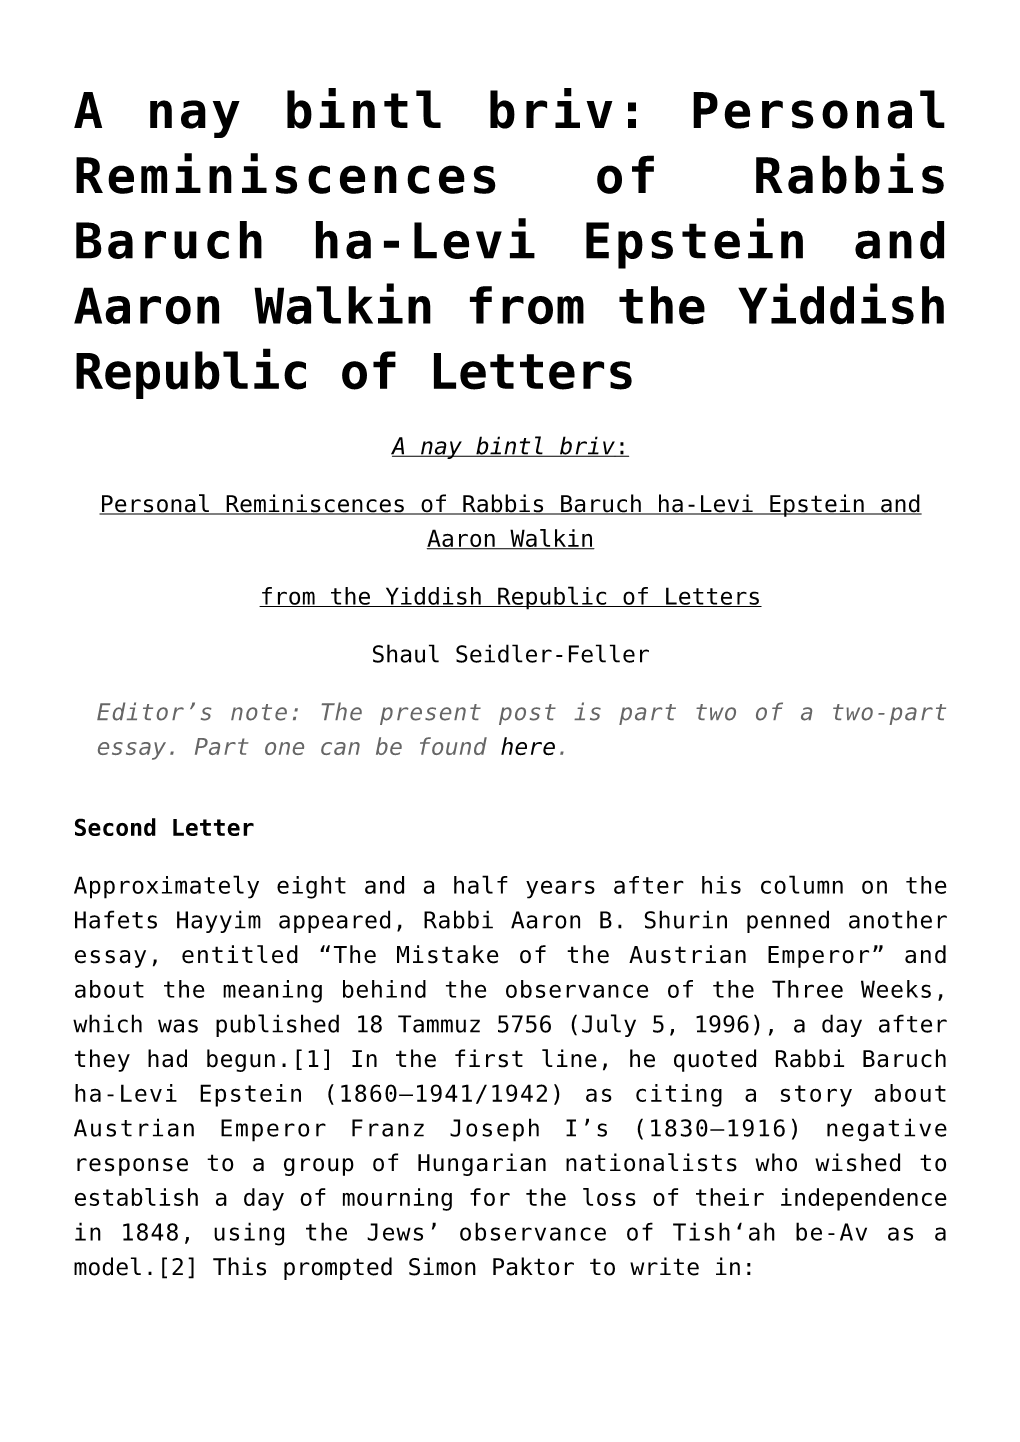 A Nay Bintl Briv: Personal Reminiscences of Rabbis Baruch Ha-Levi Epstein and Aaron Walkin from the Yiddish Republic of Letters